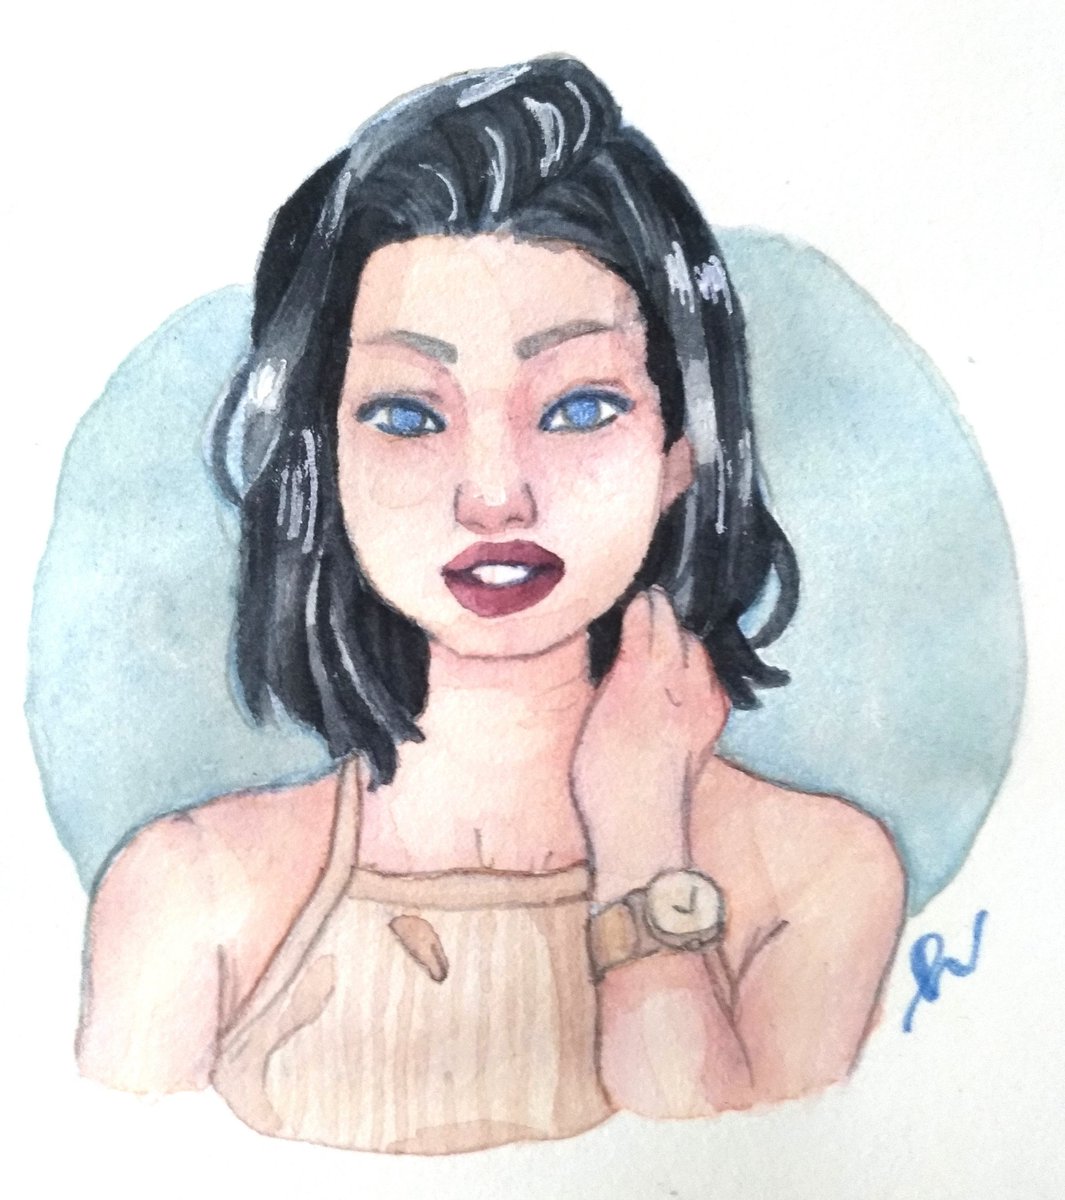 let me startIm Therese and watercolors make me feel alive (sorry havent done anything new oof her are my old works)